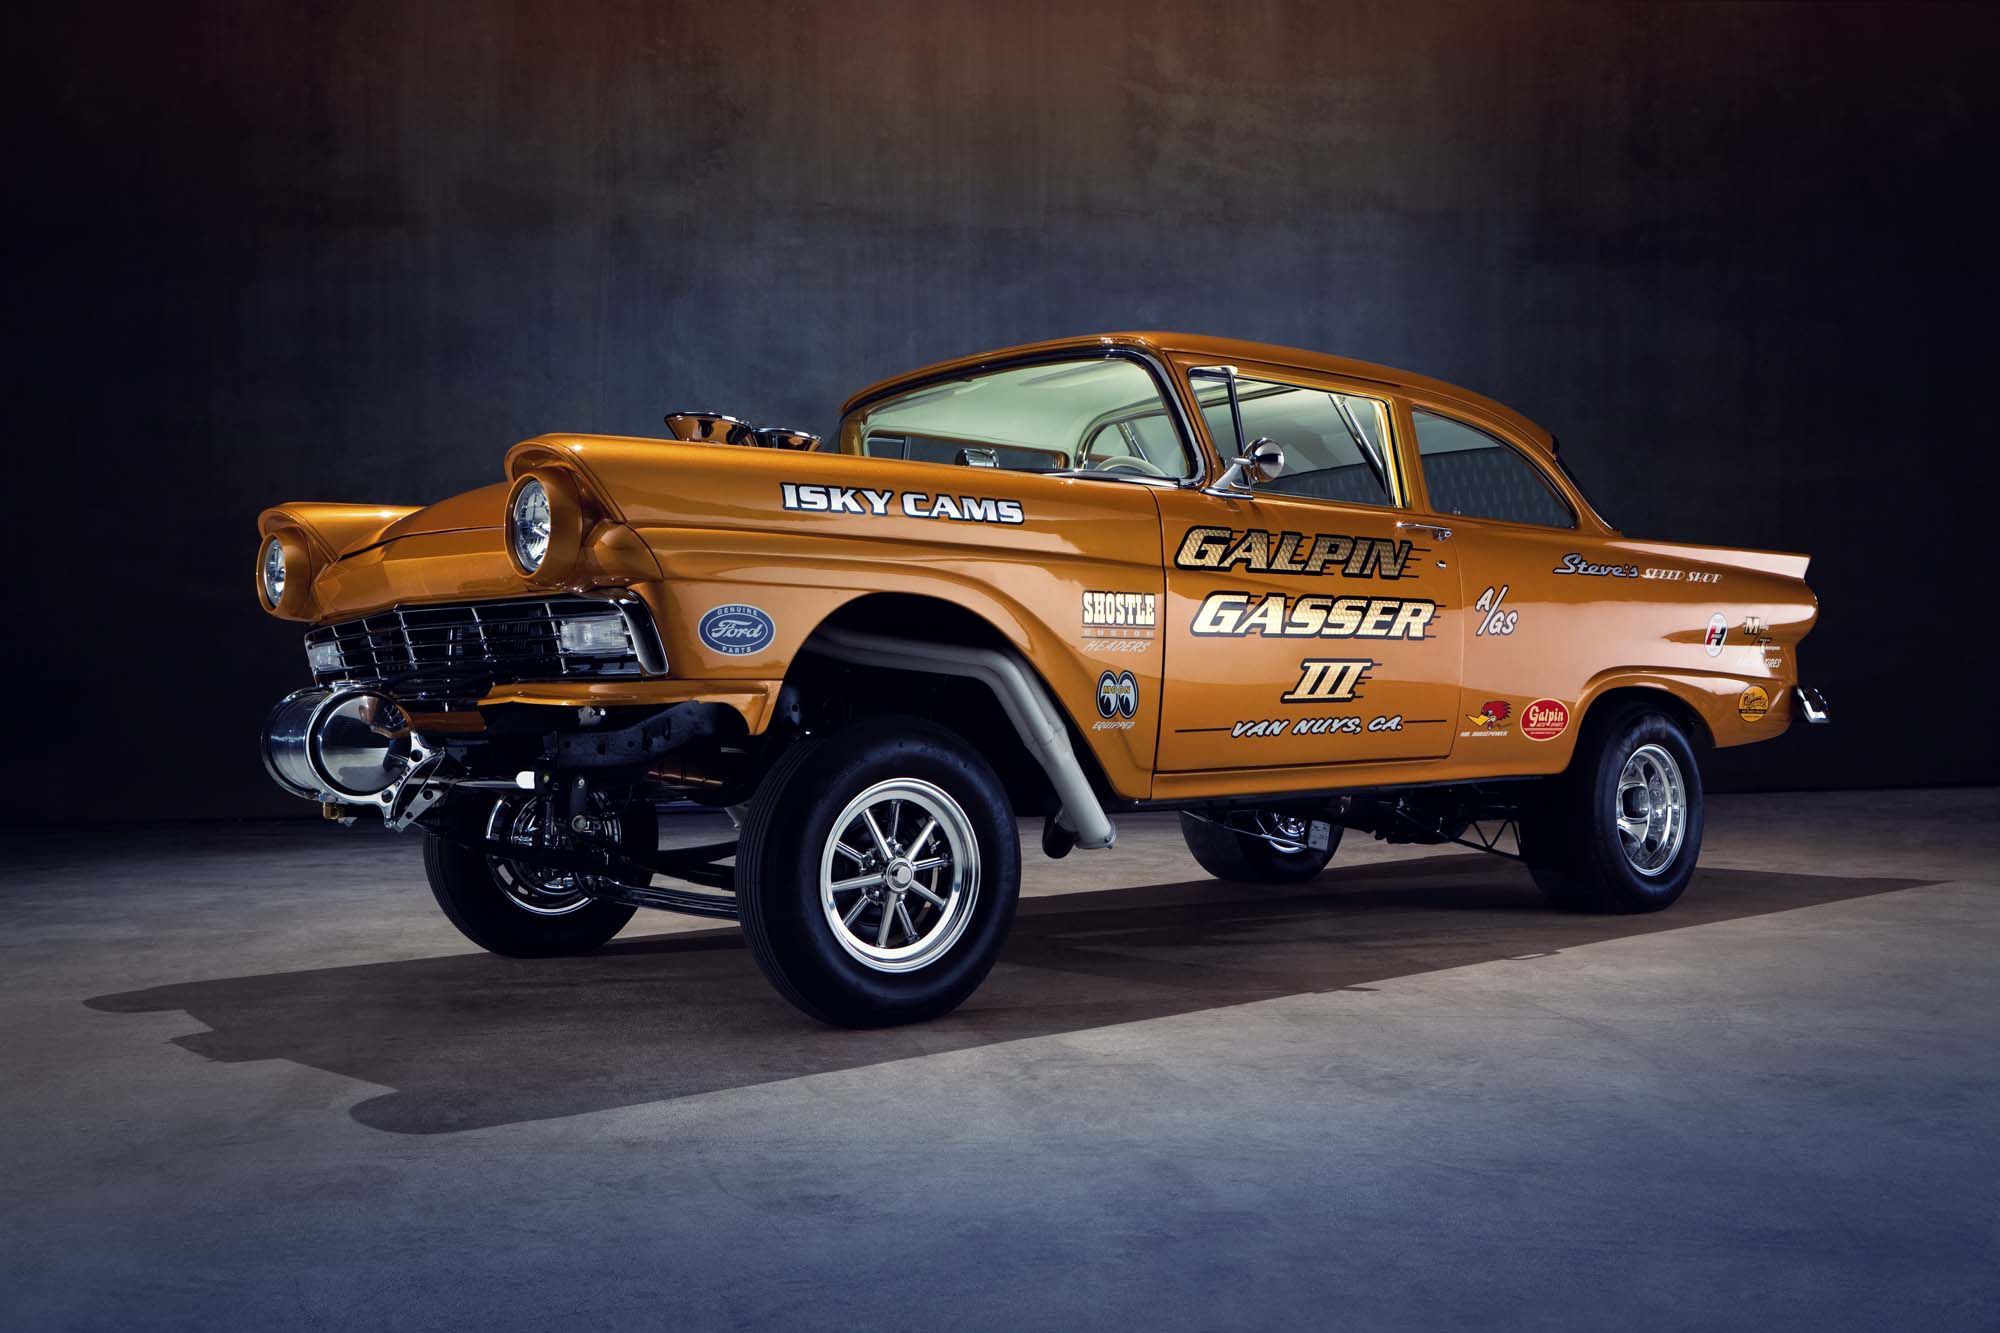 Gasser wallpapers, Vehicles, HQ Gasser pictures.